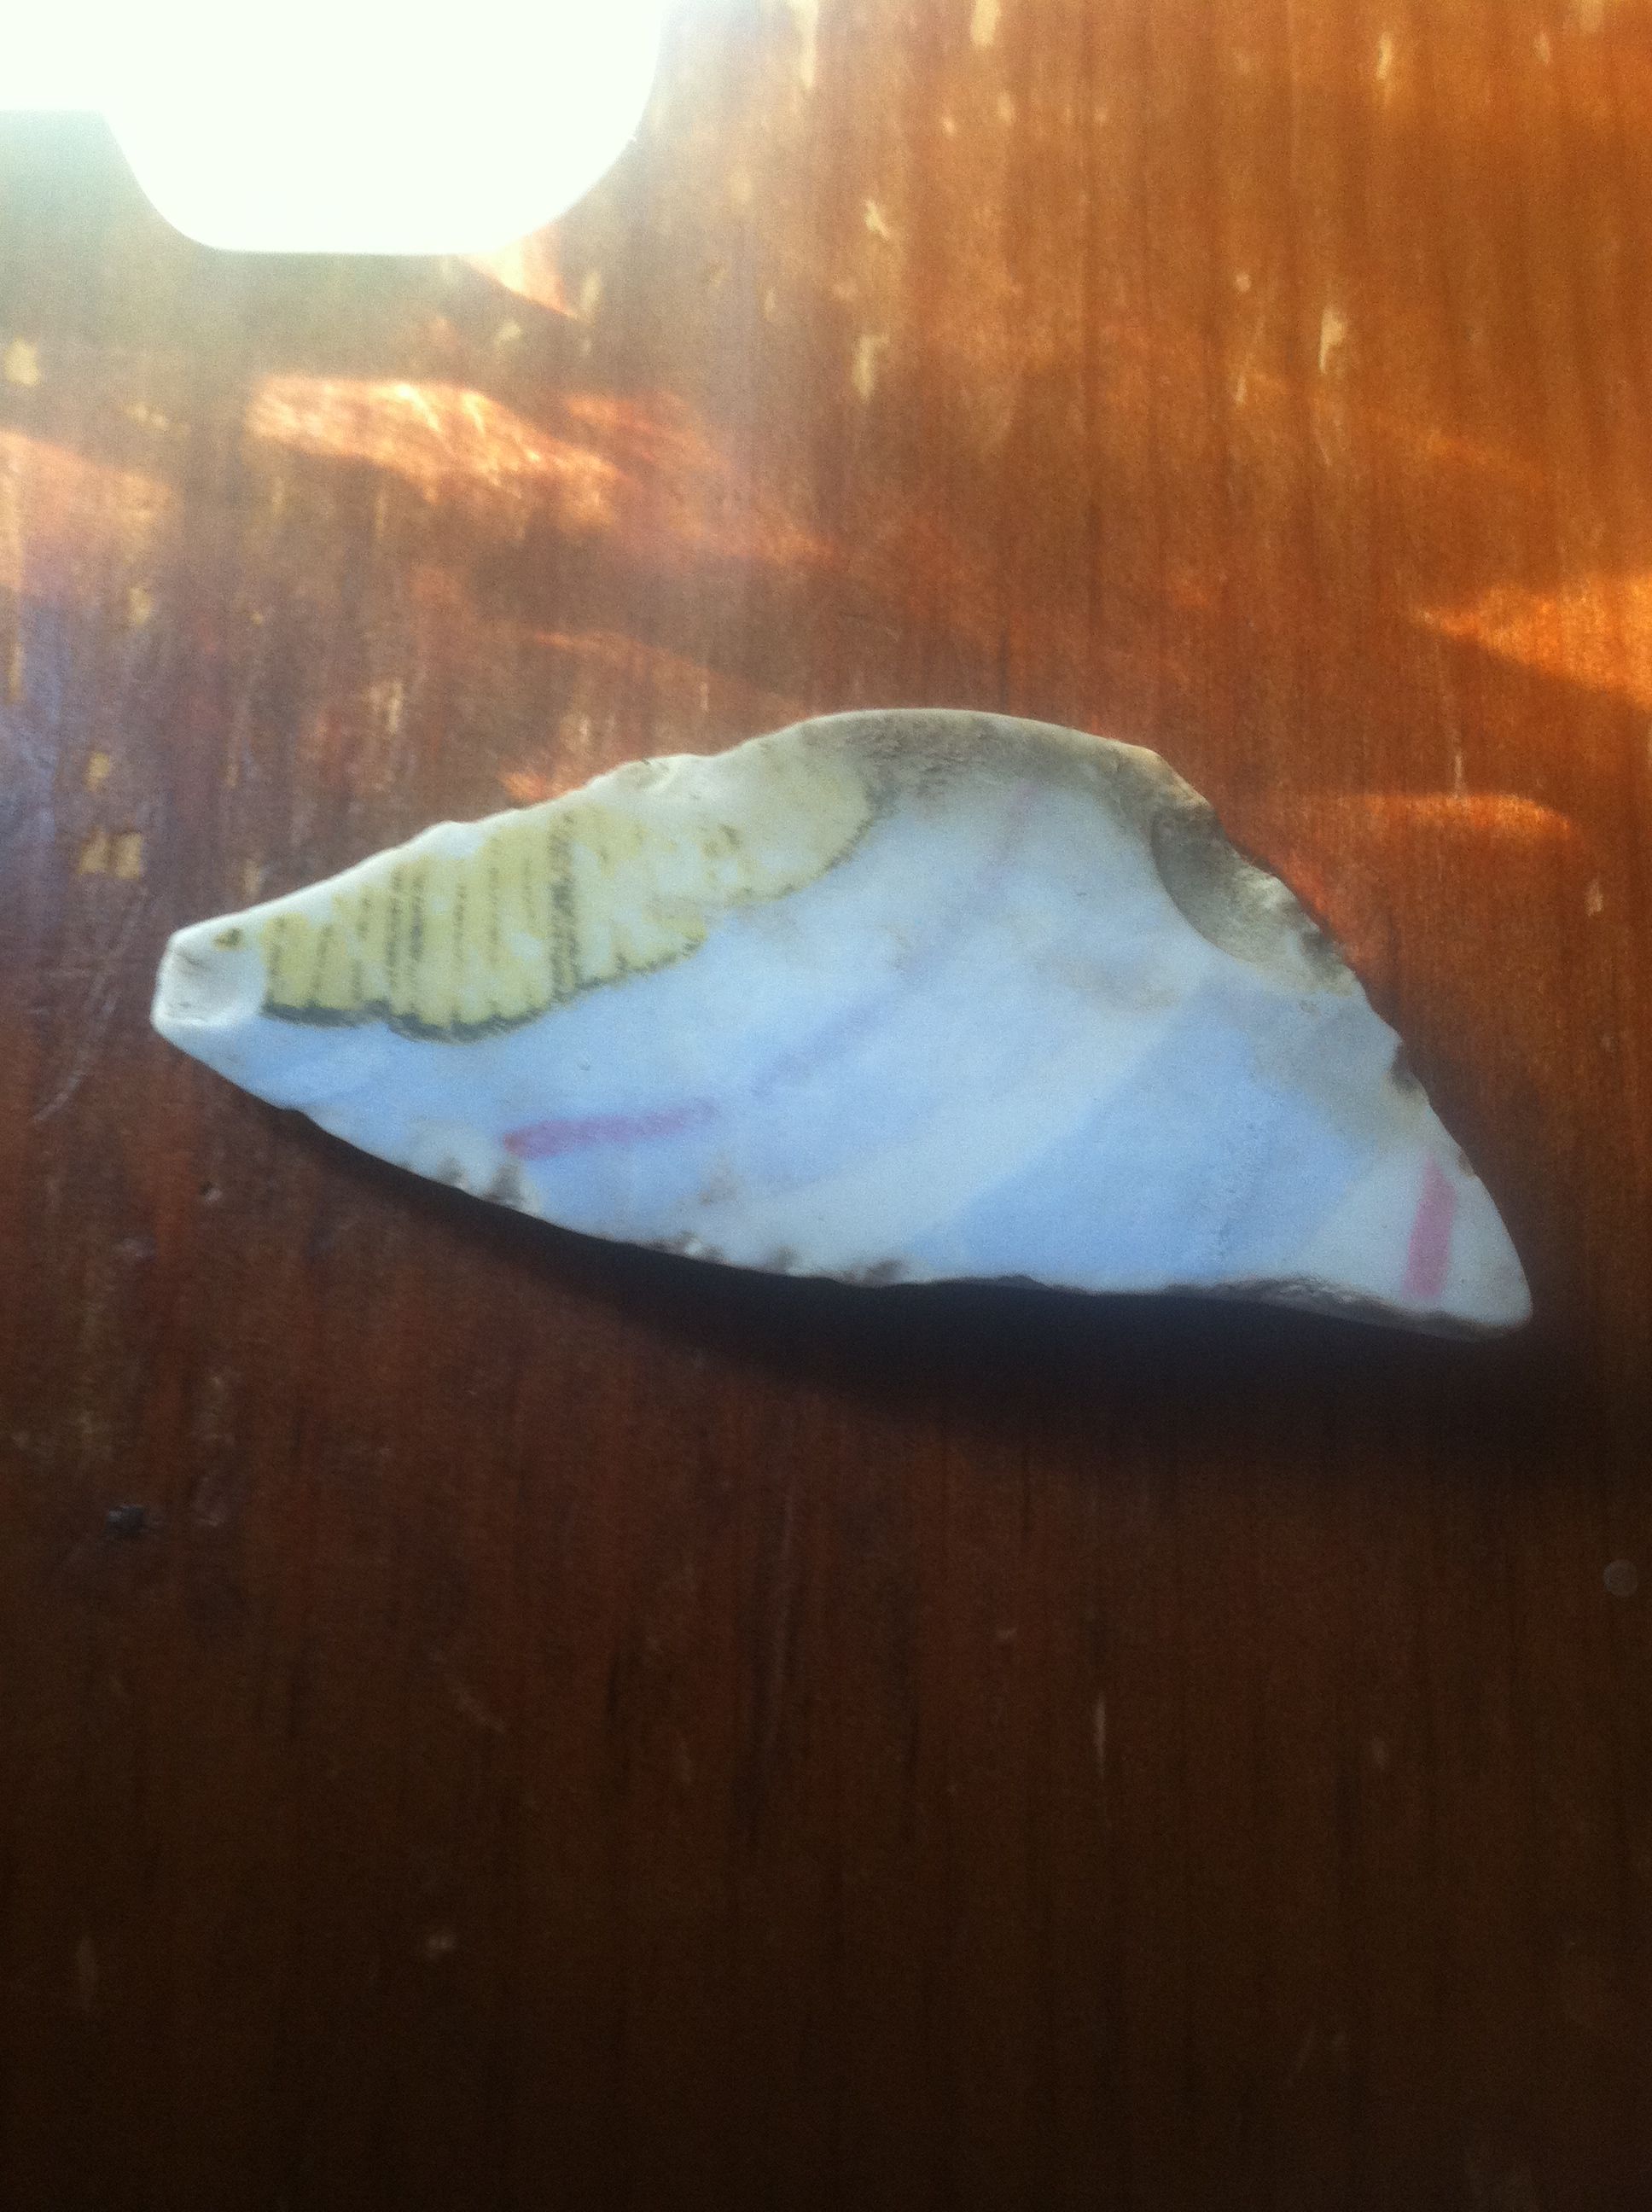 Found on beach of creek in the woods.